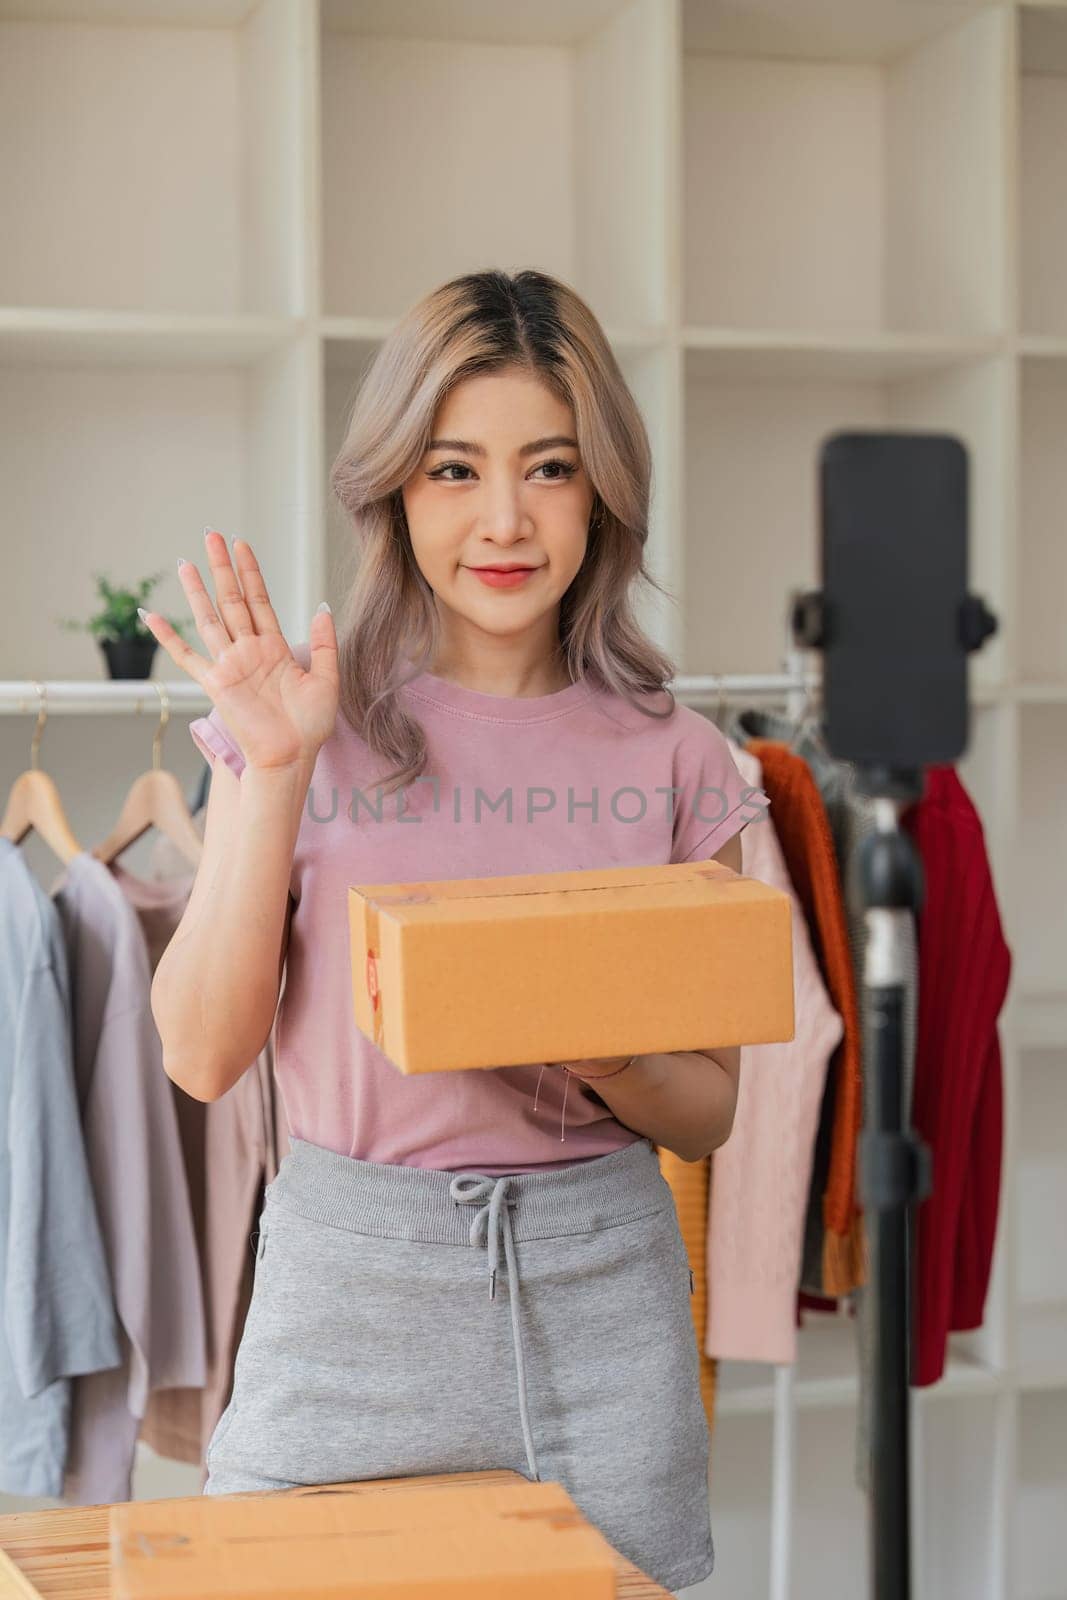 Woman entrepreneur showing clothes product on live online social media streaming and packing into cardboard box to preparing for shipping customer delivery at home.